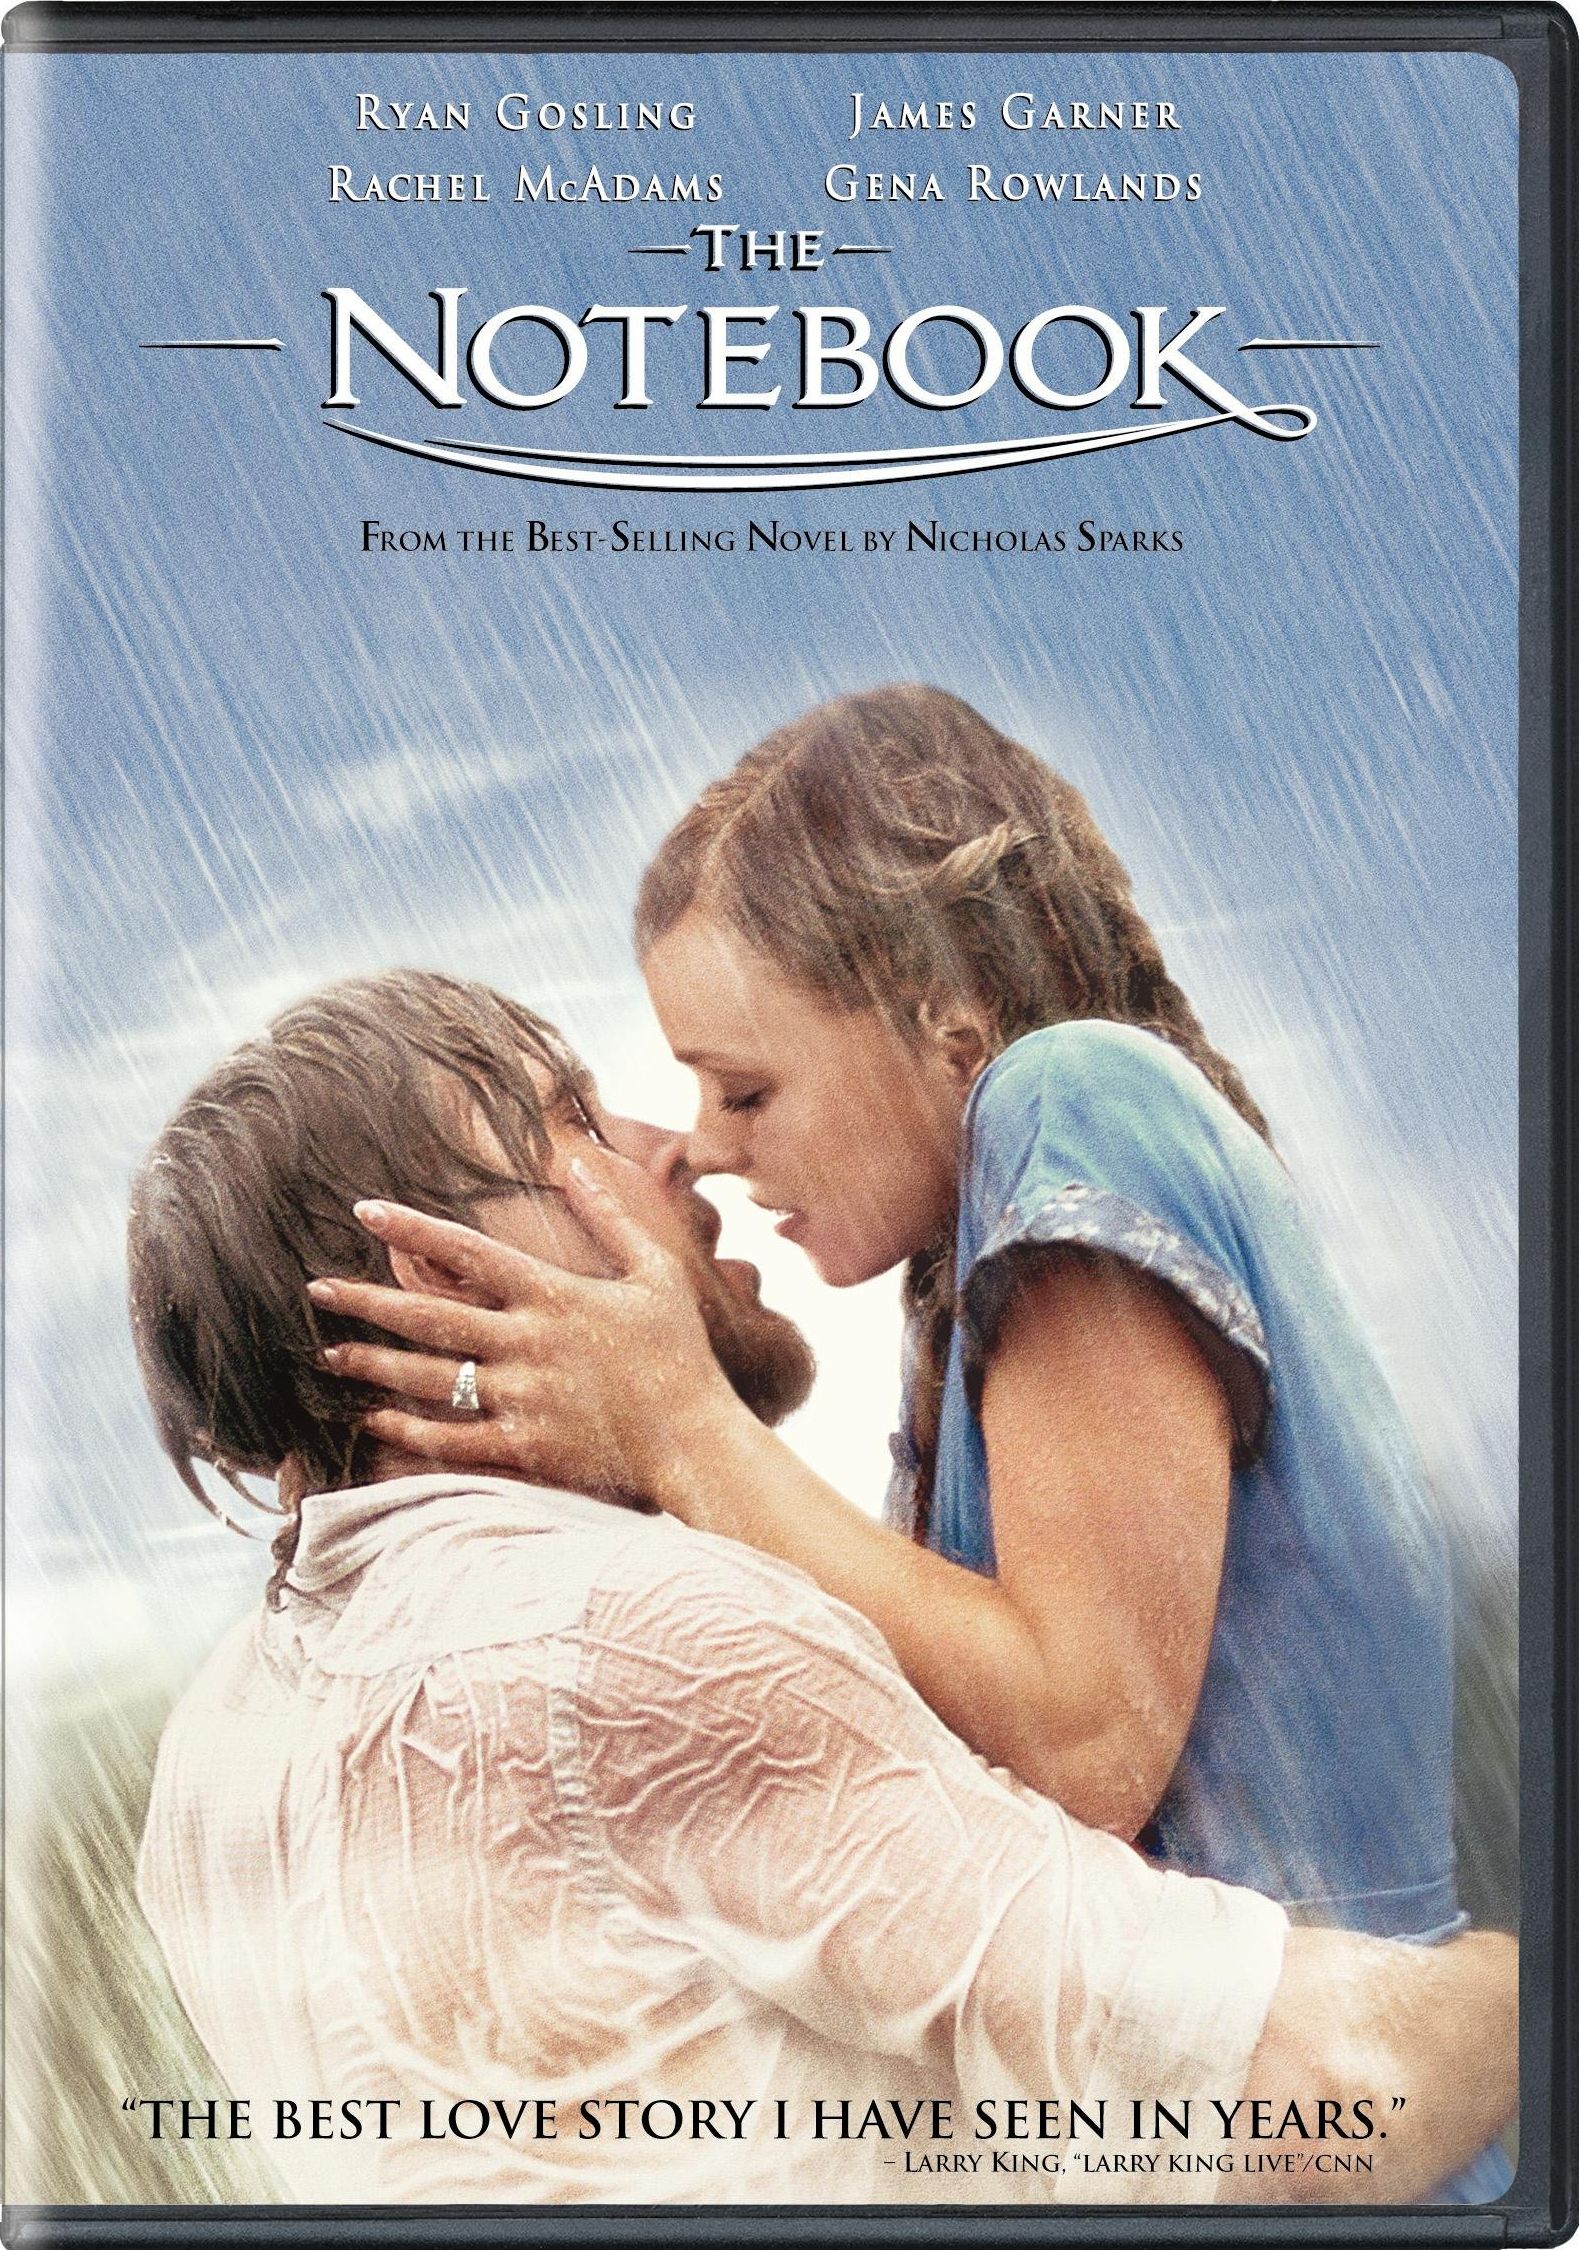 The Notebook DVD Release Date February 8, 2005